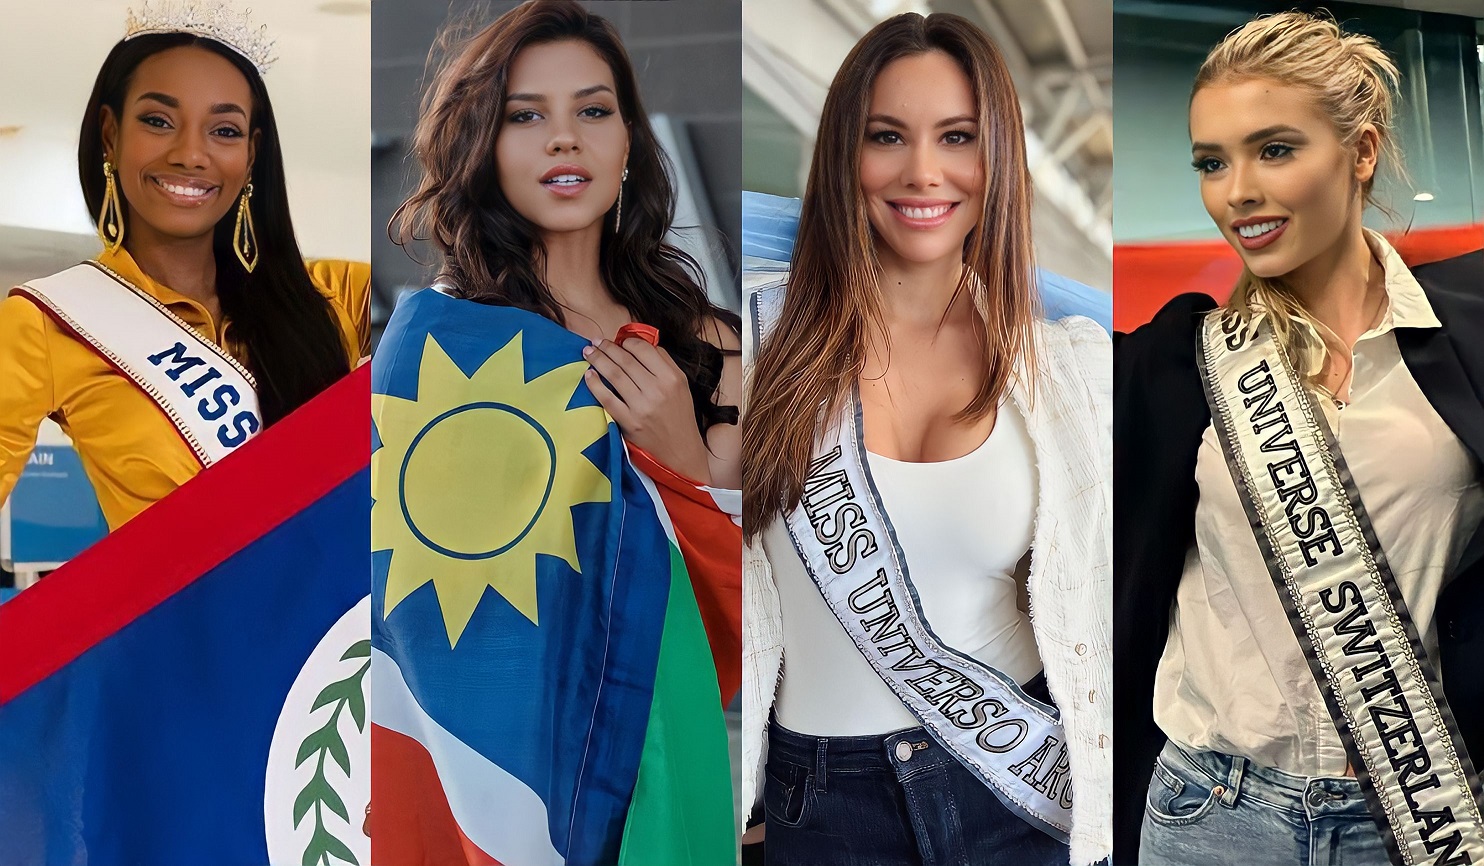 71st Miss Universe contestants depart for New Orleans to compete for